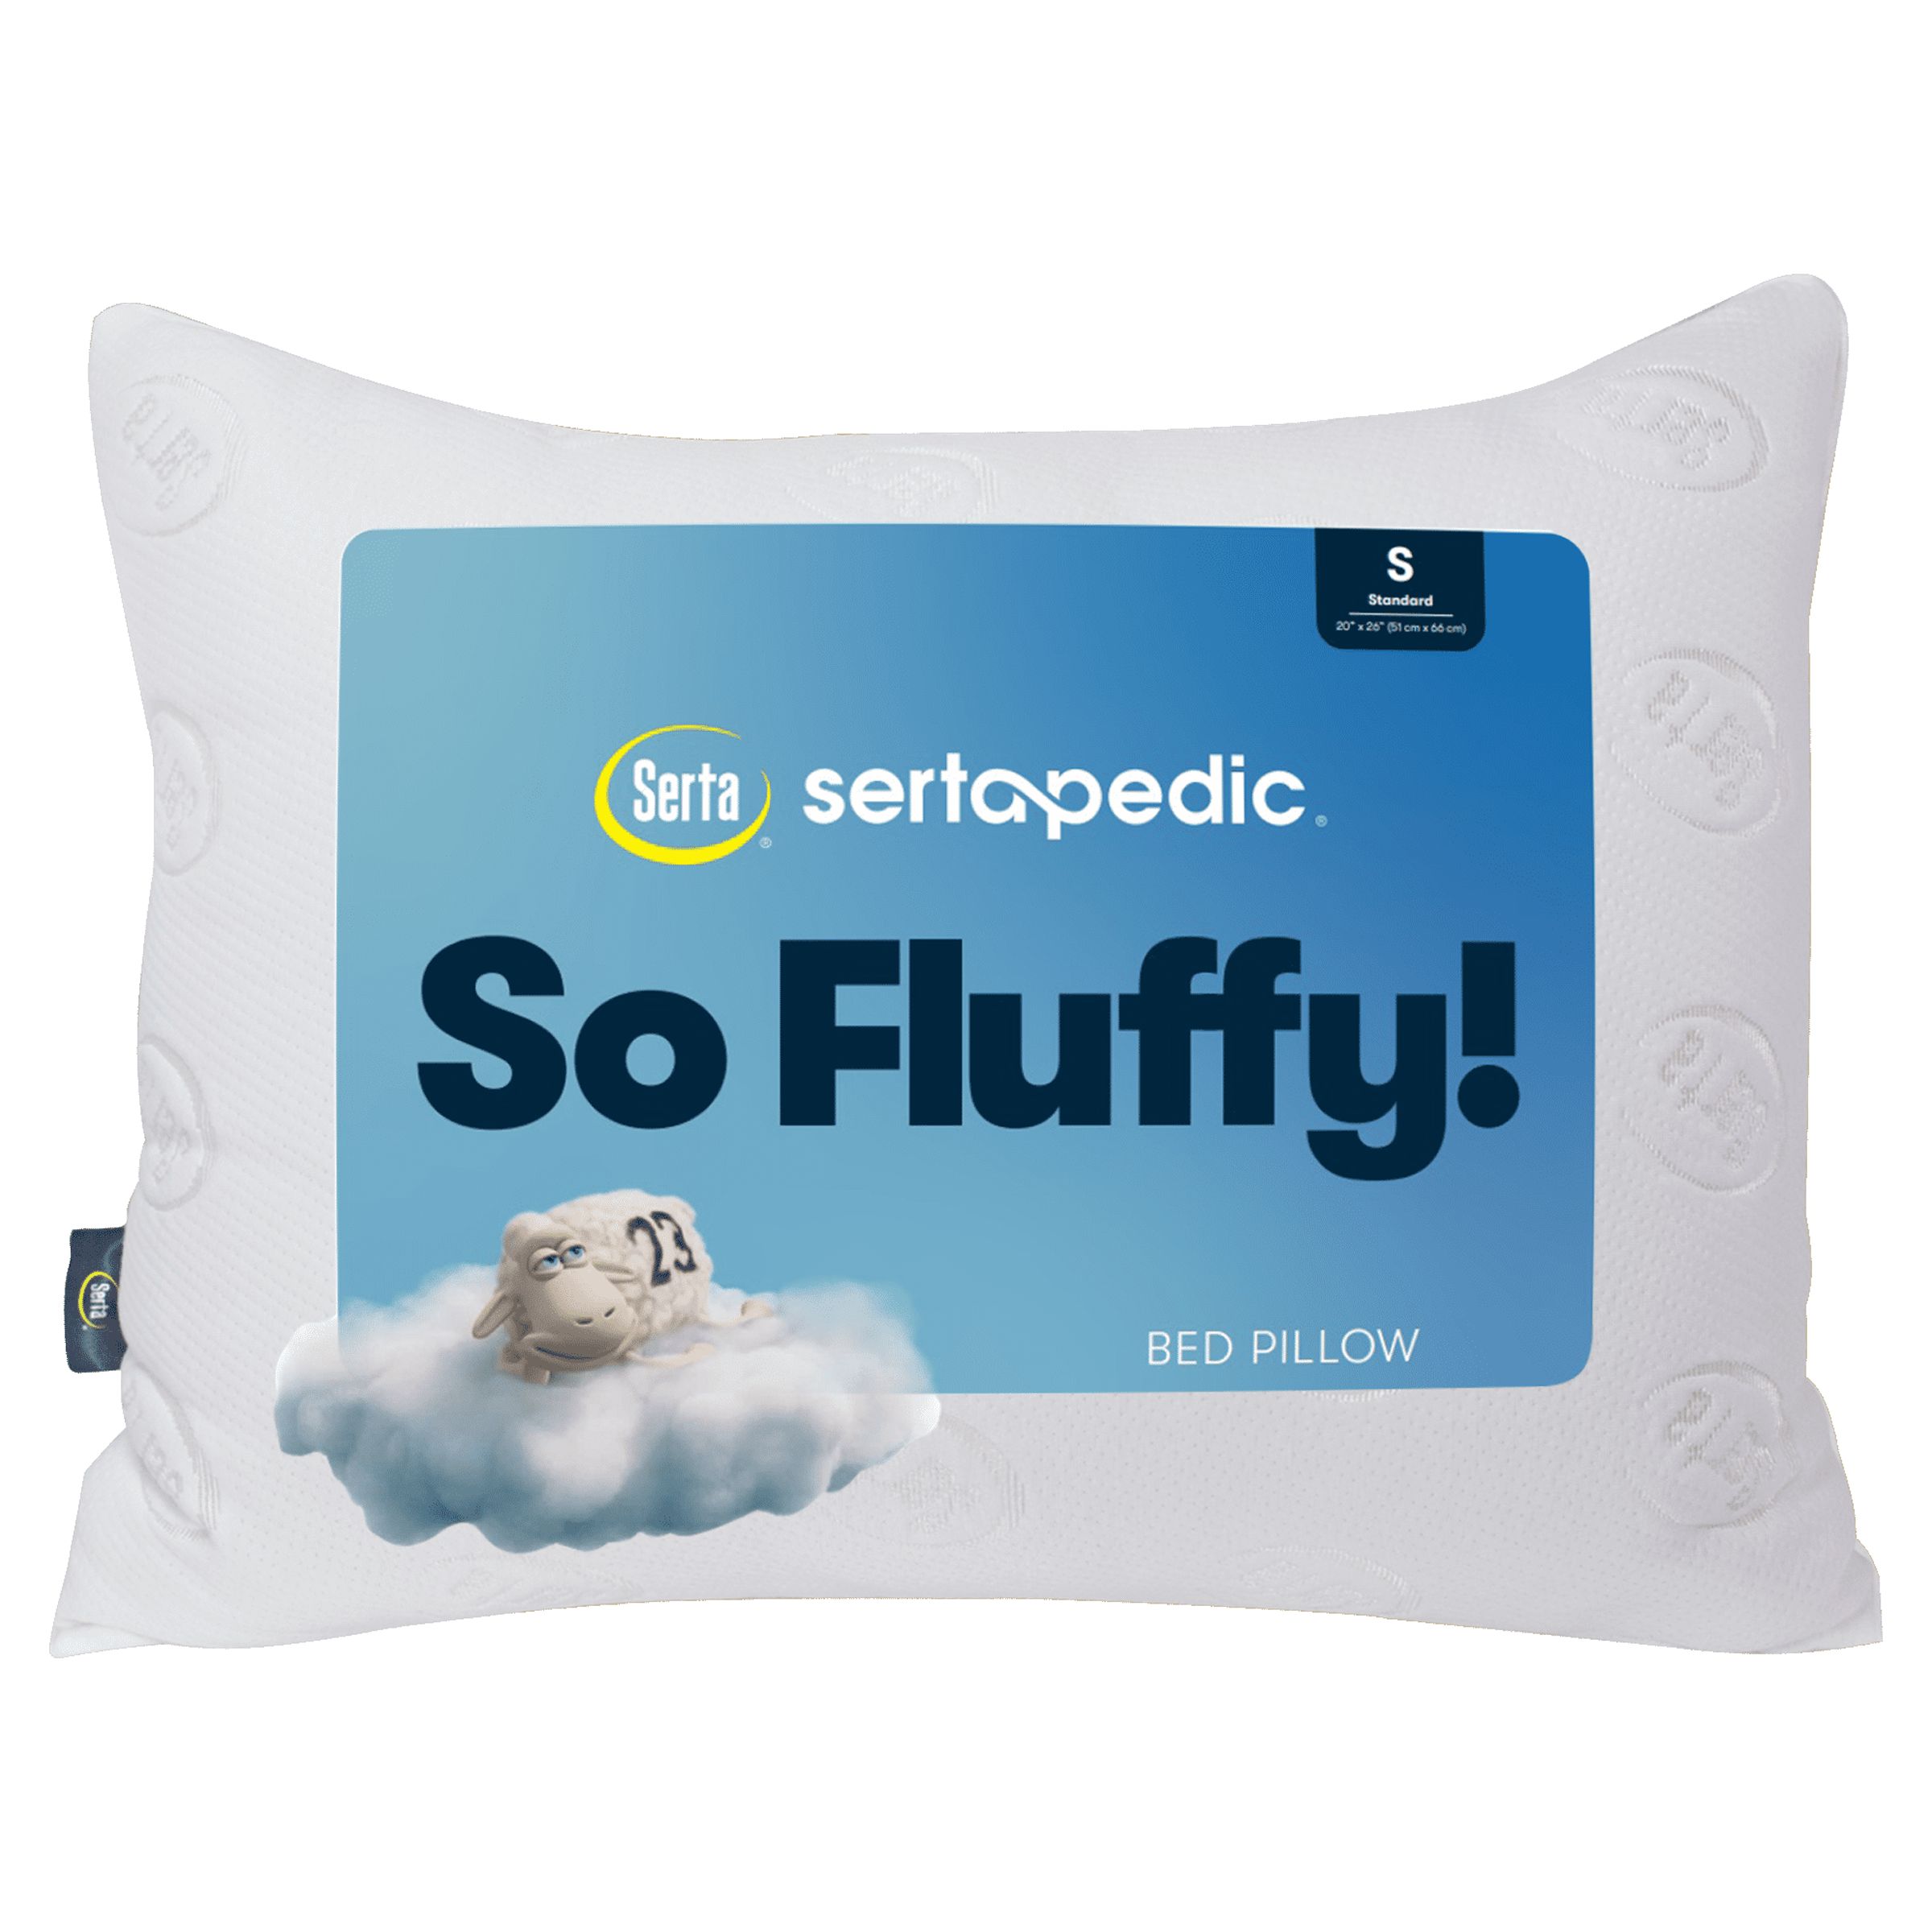 Serta So Fluffy Bed Pillow, Standard (2021 Version) - image 1 of 5